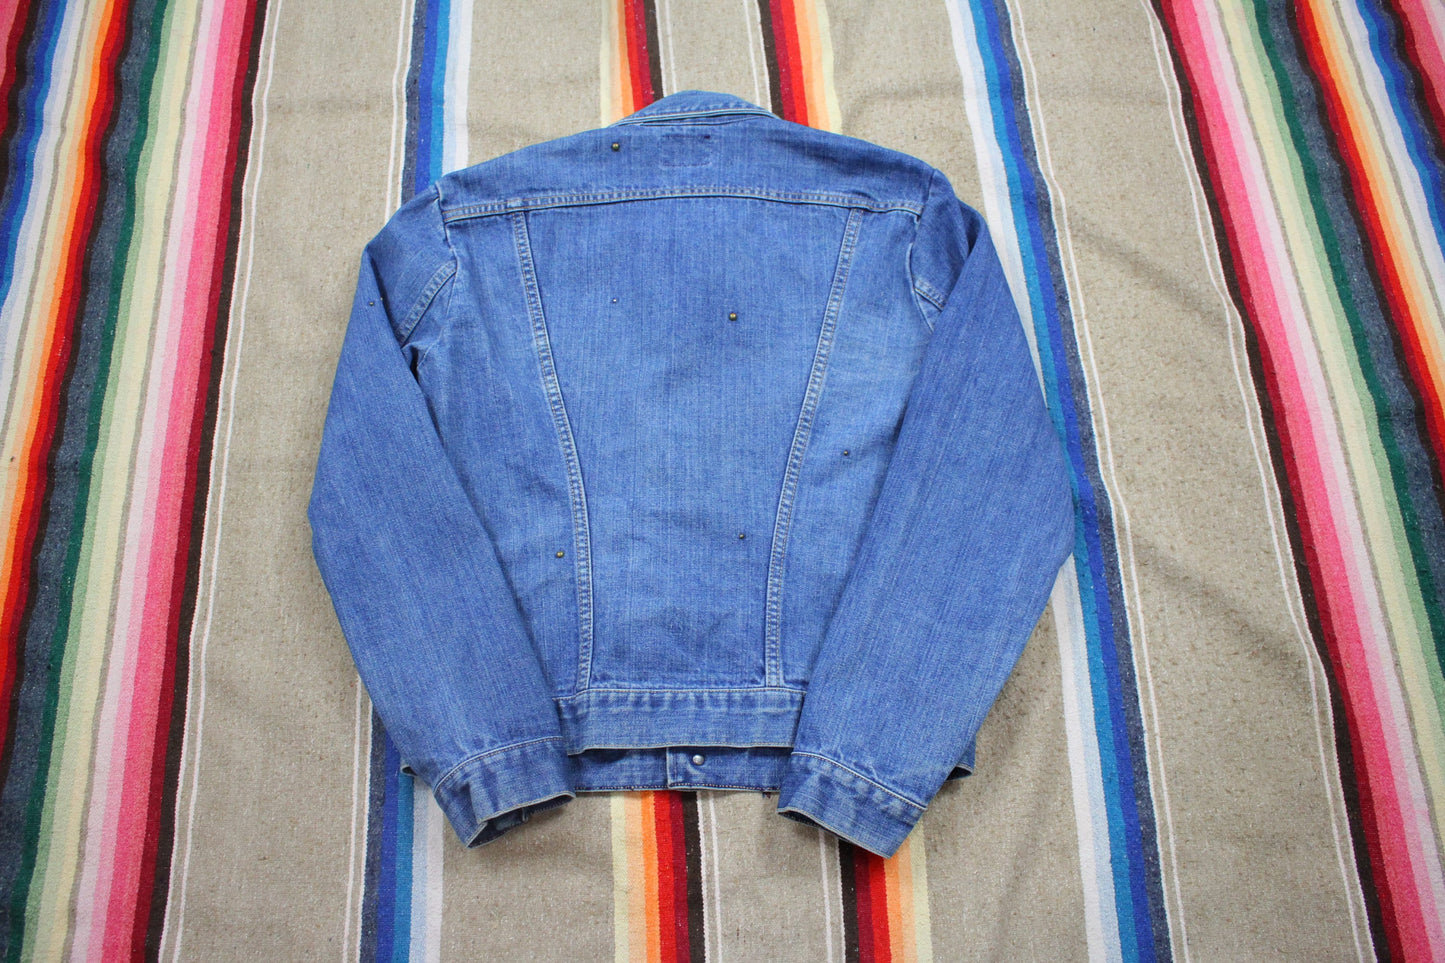 1970s Wrangler Denim Jacket with Studded Detailing Made in USA Size S/M